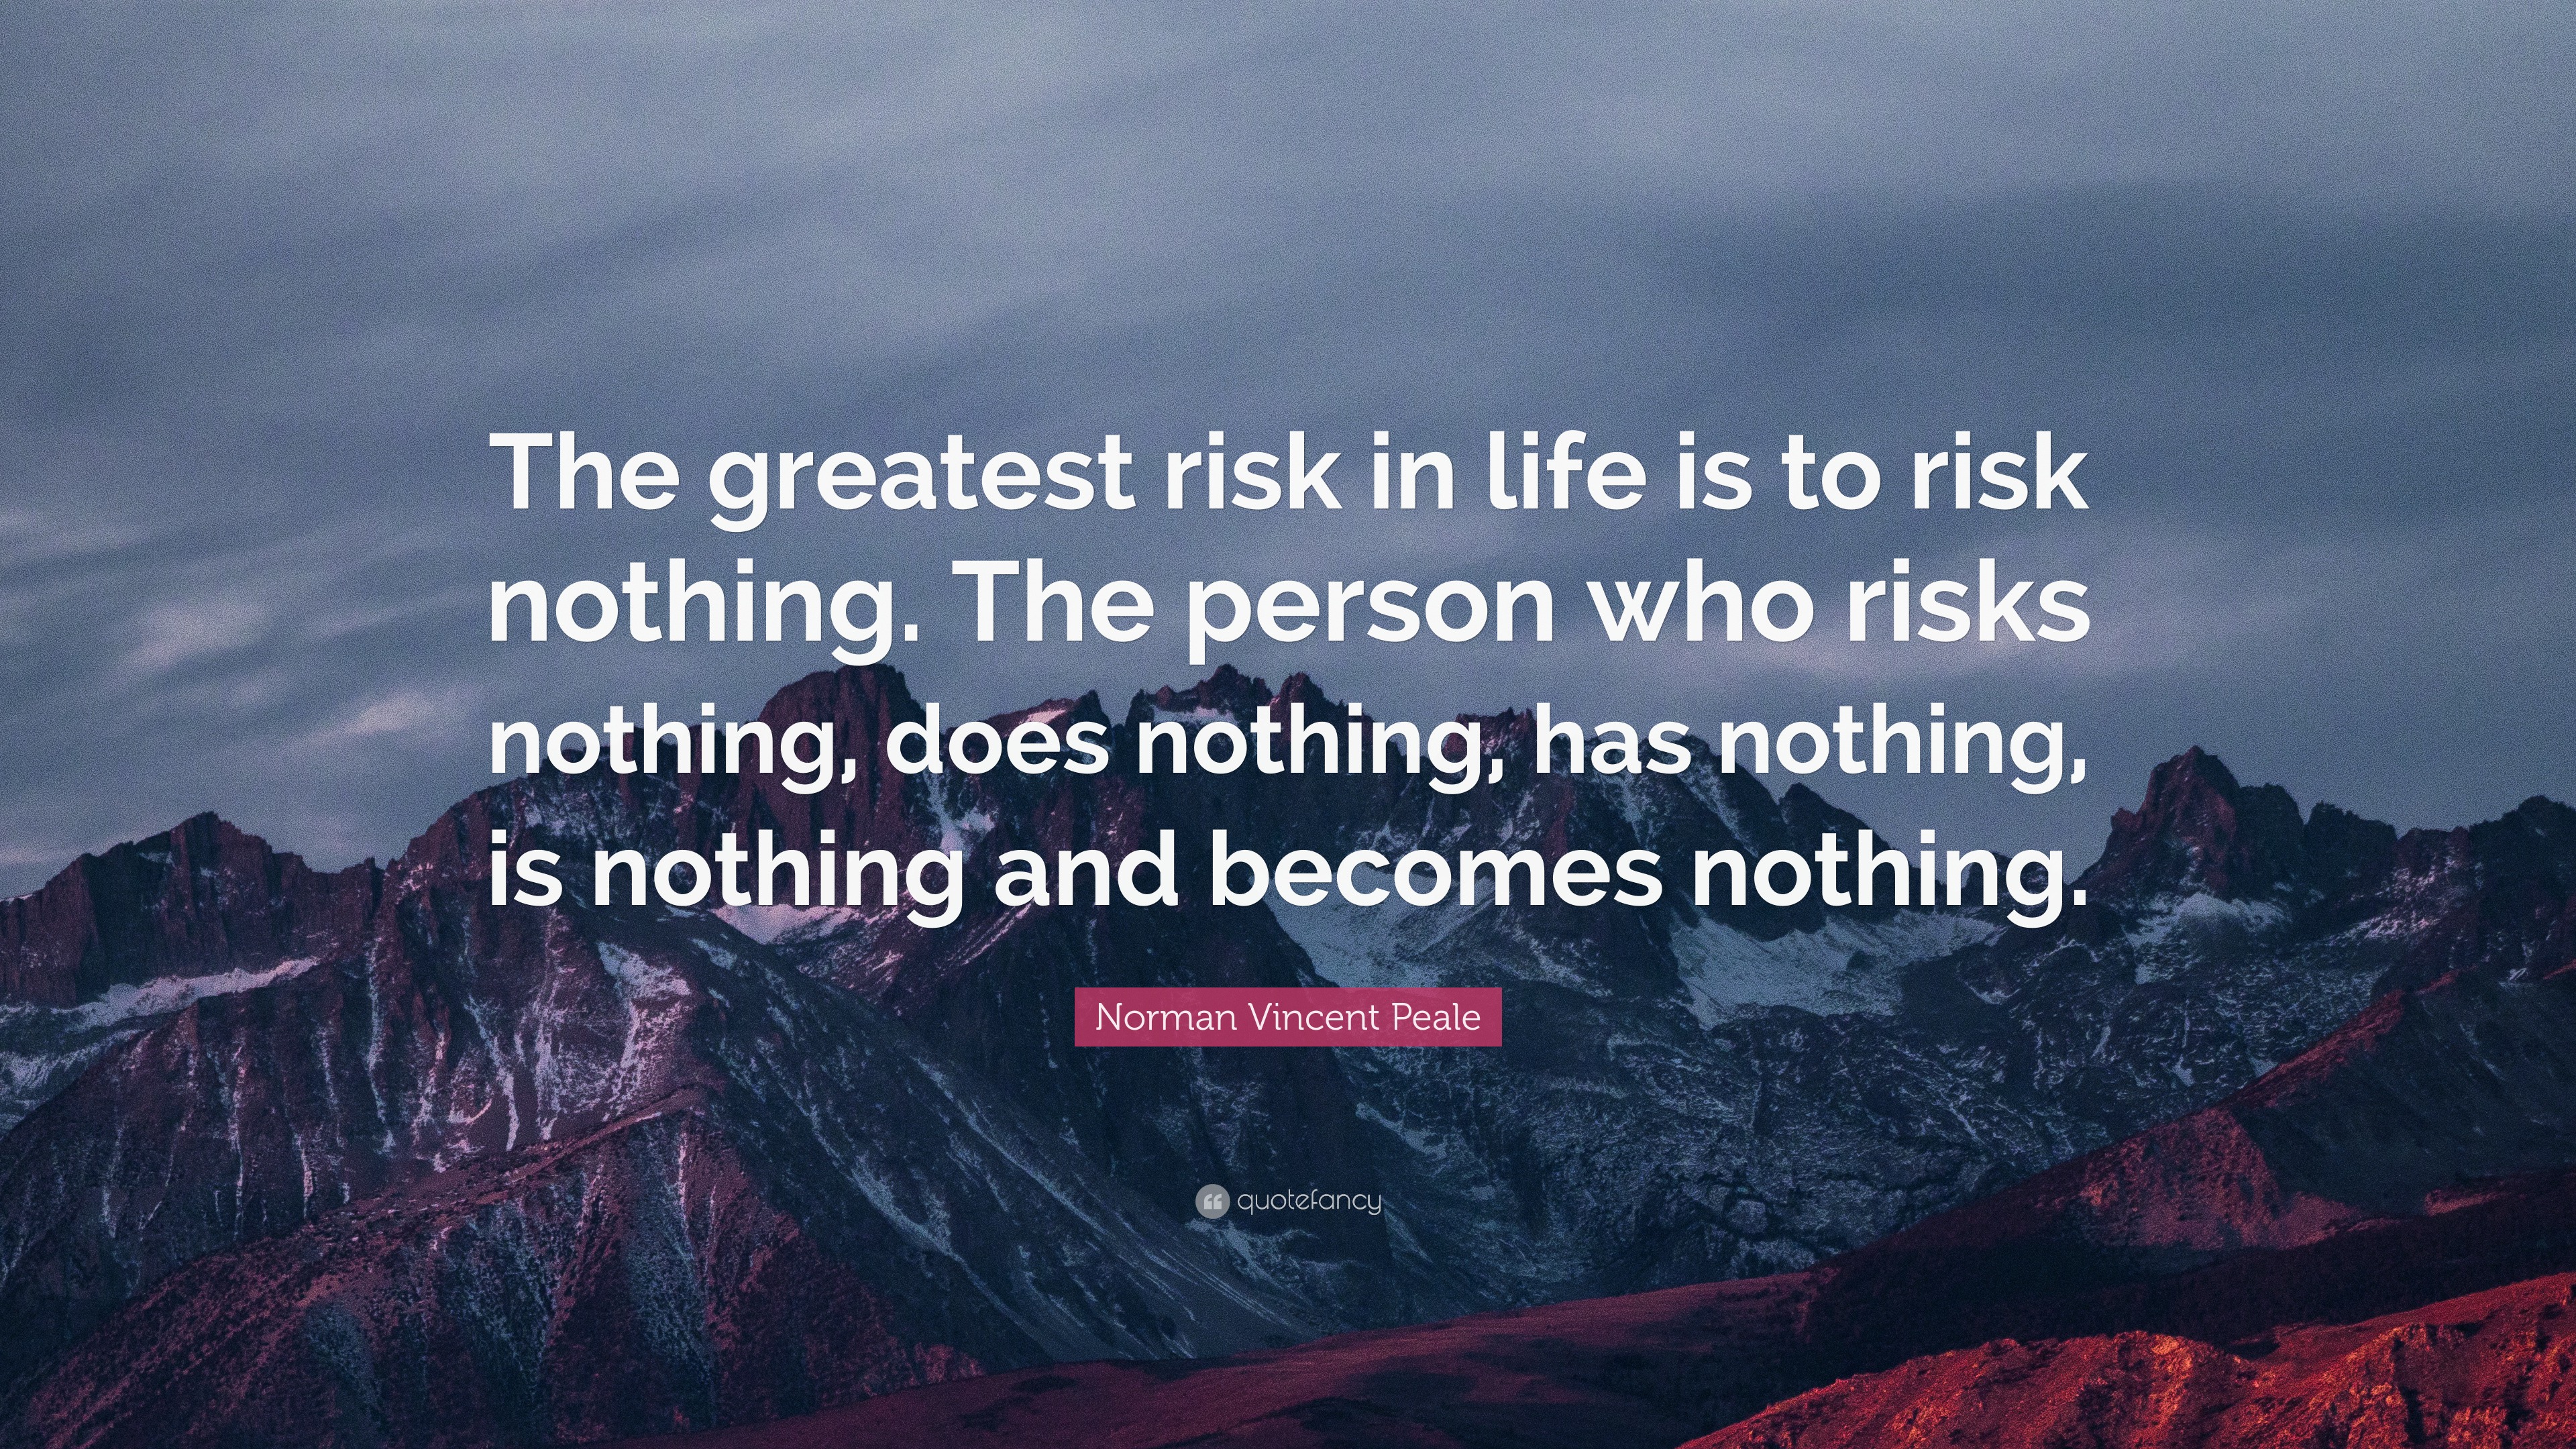 Norman Vincent Peale Quote “The greatest risk in life is